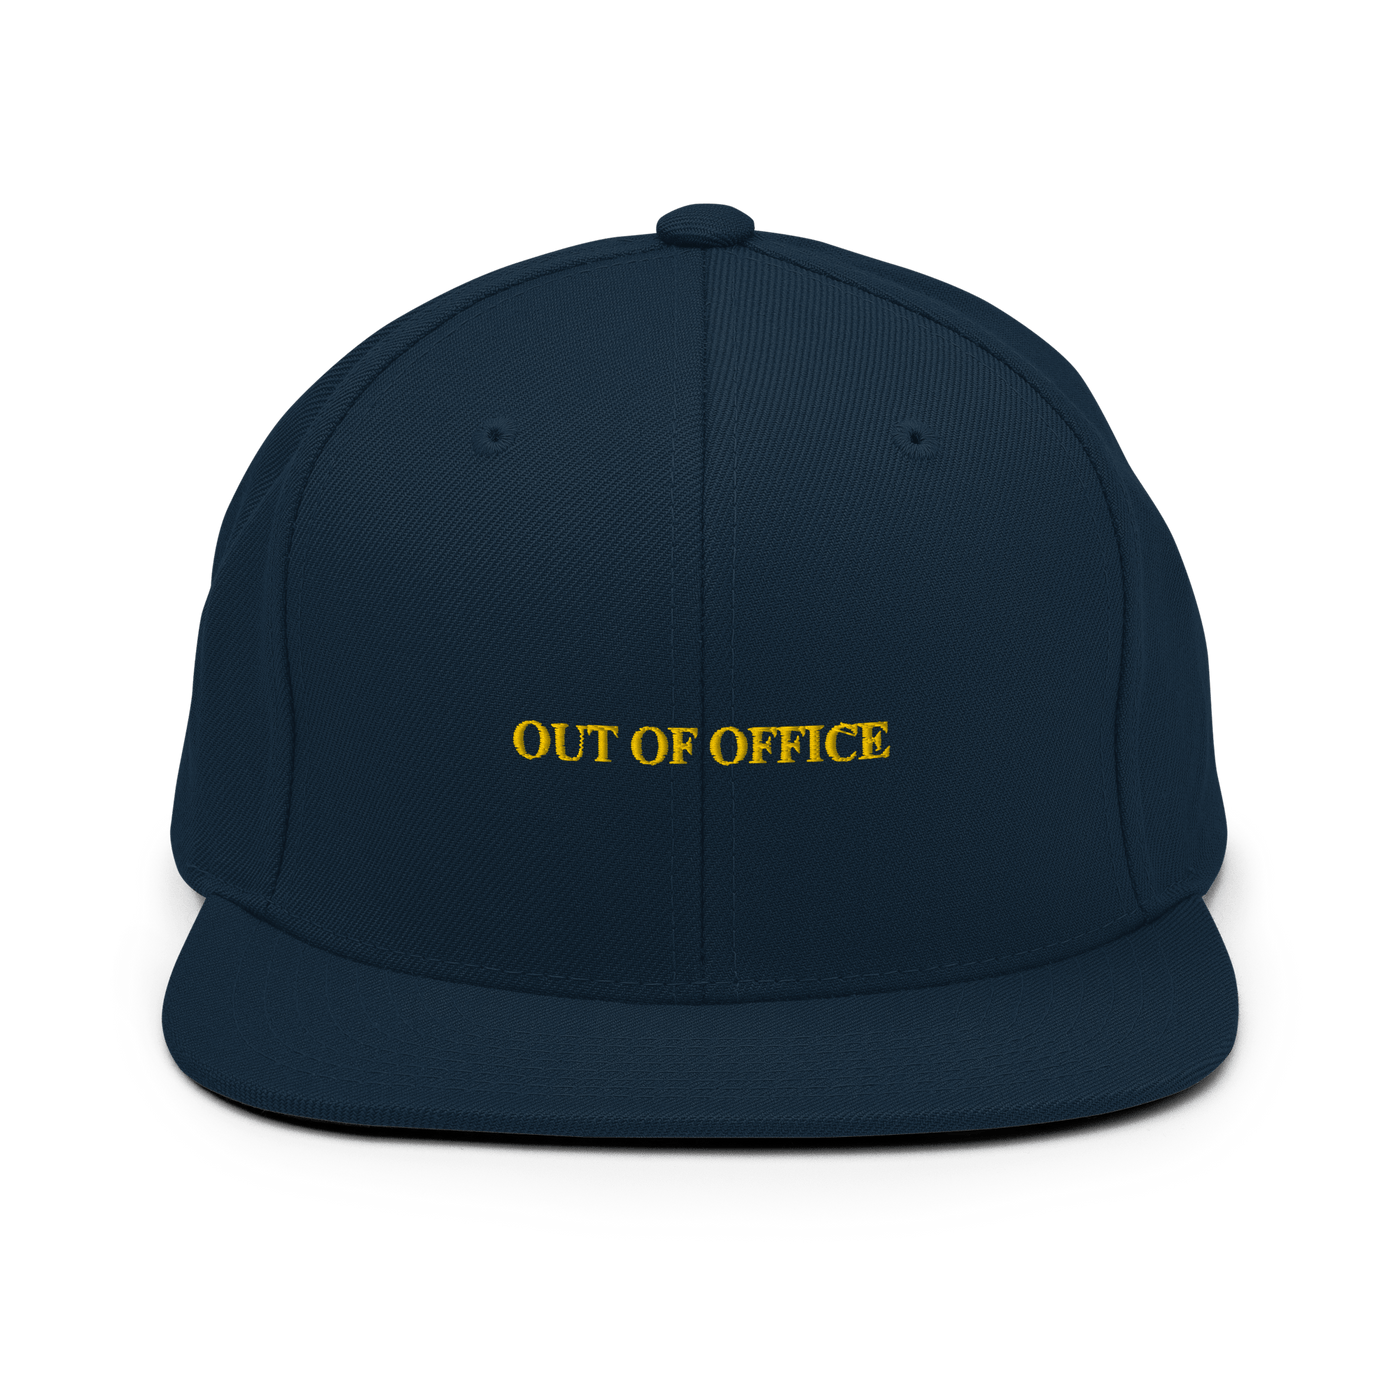 OUT OF OFFICE Snapback - Dark Navy - - Just Another Cap Store